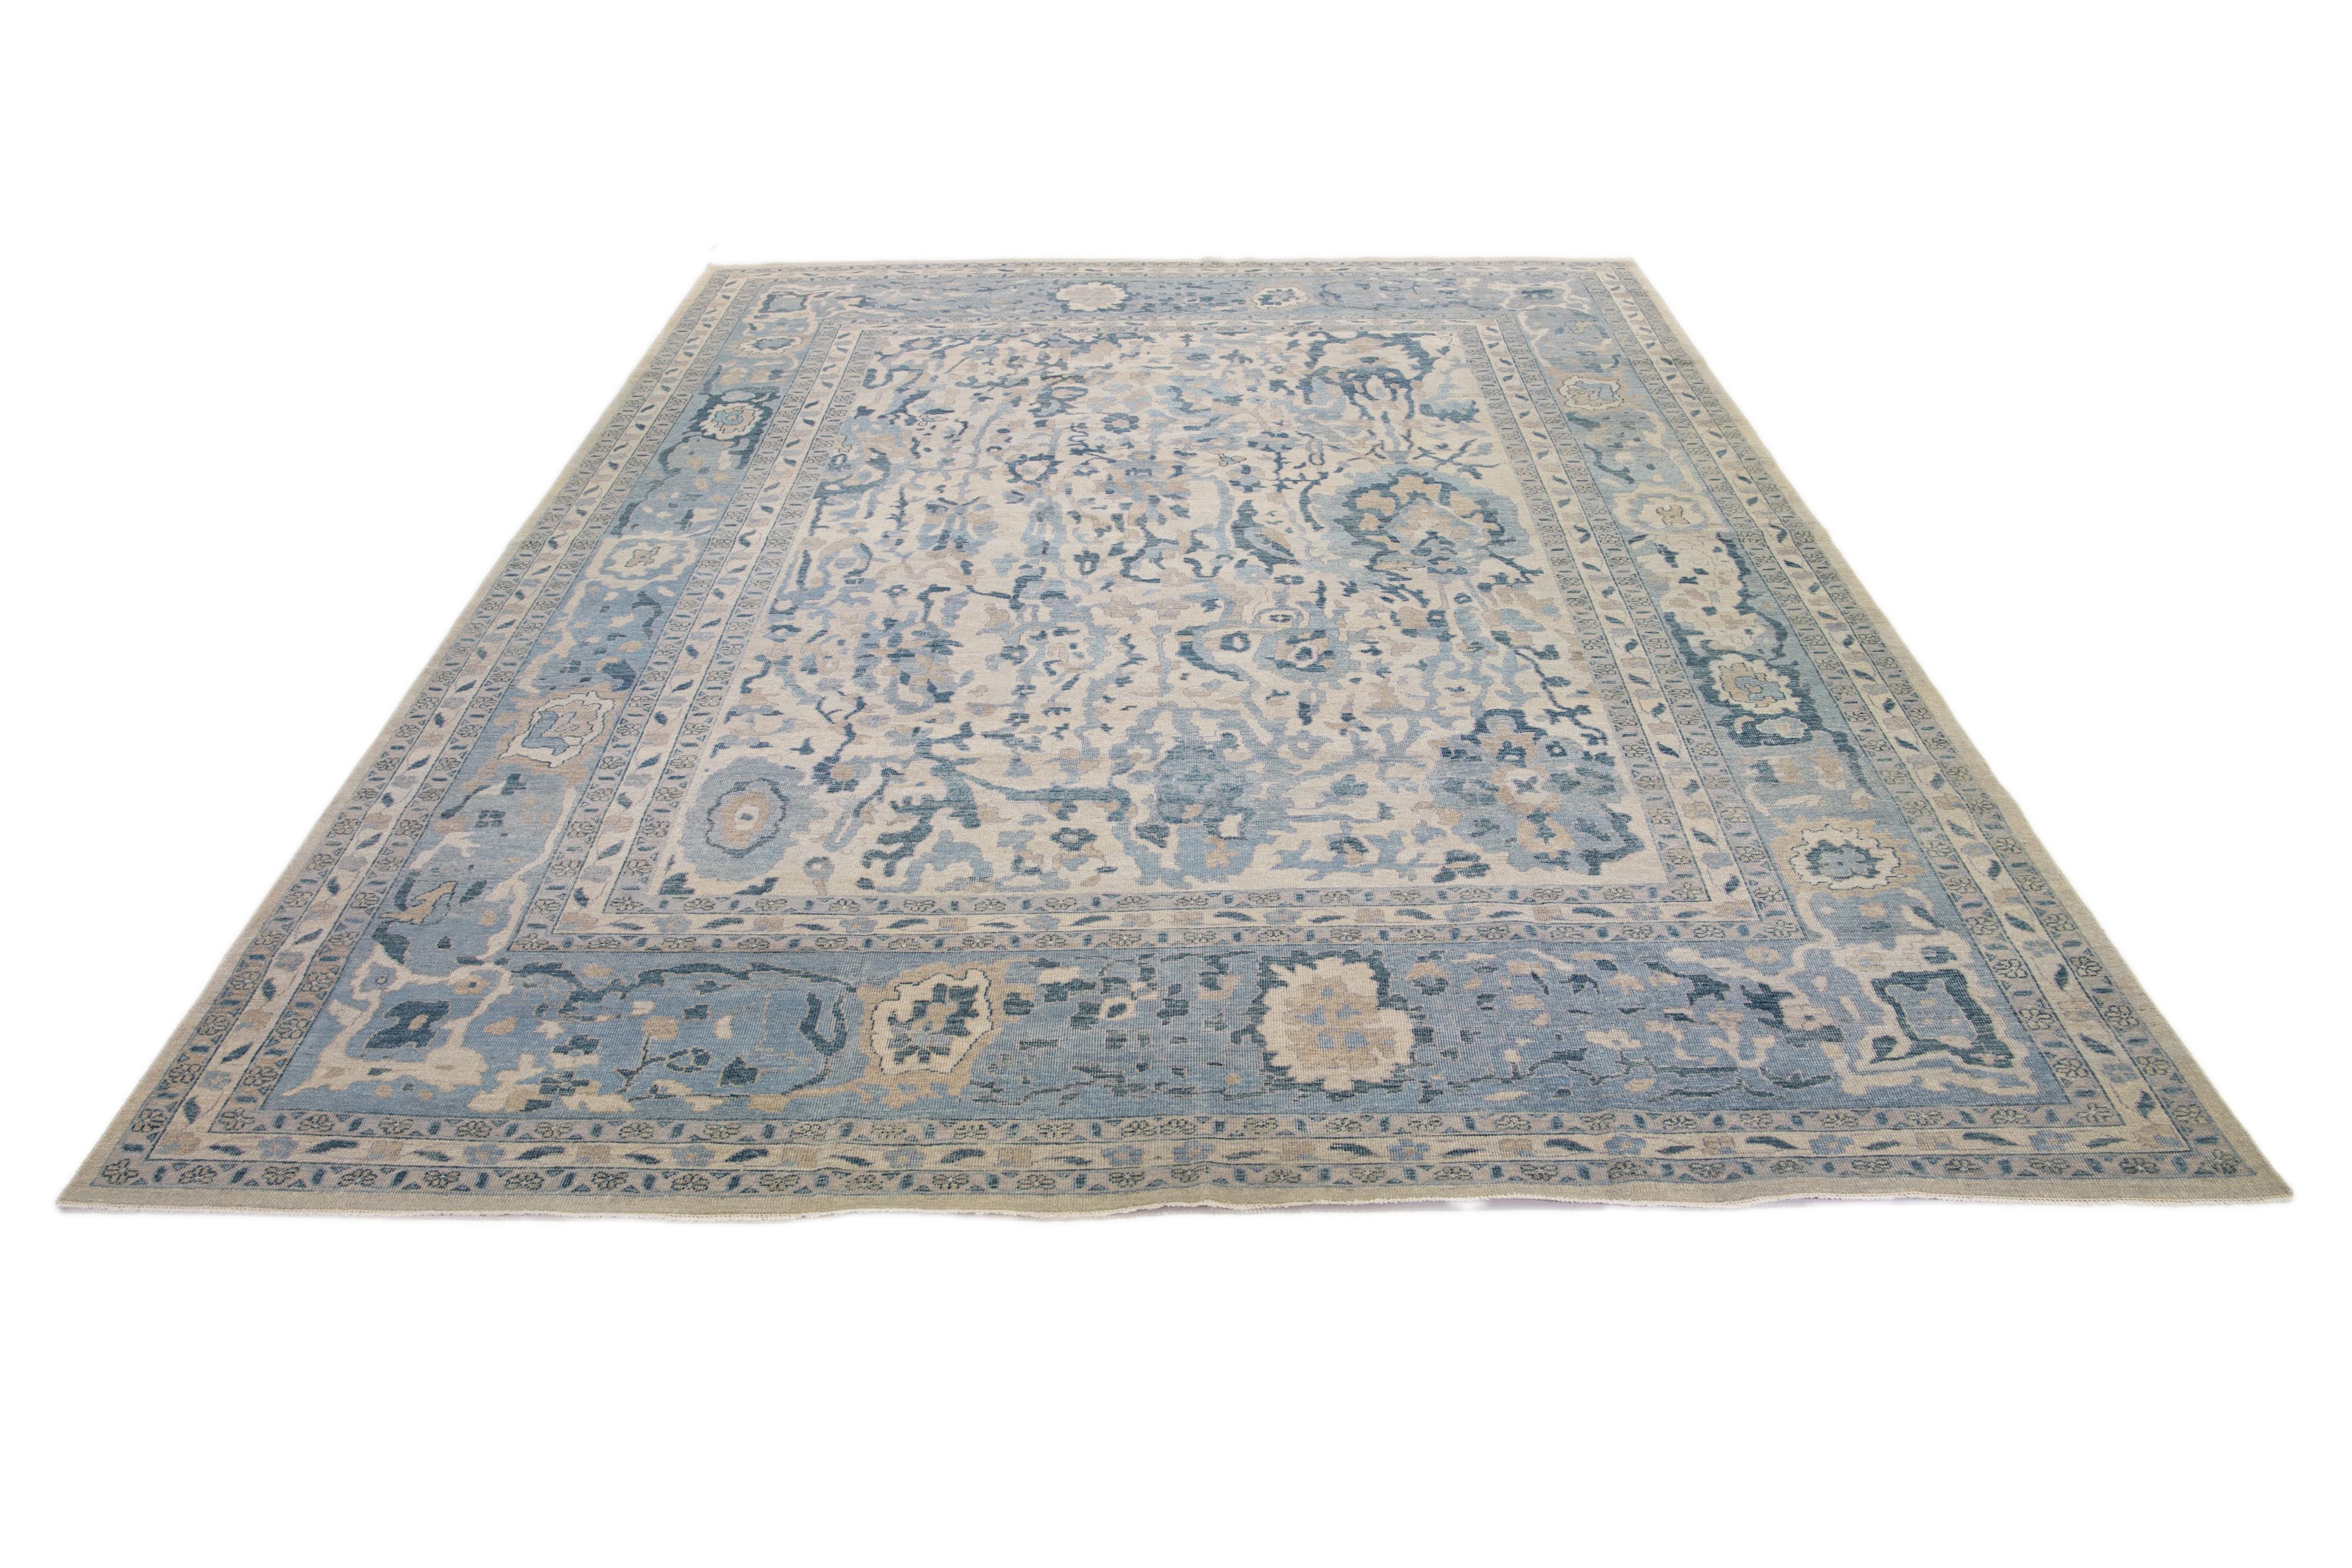 A Khotan wool rug In a beige color field with allover floral designs. This hand-knotted modern piece has blue accents that complement the design.

This rug measures 11'11